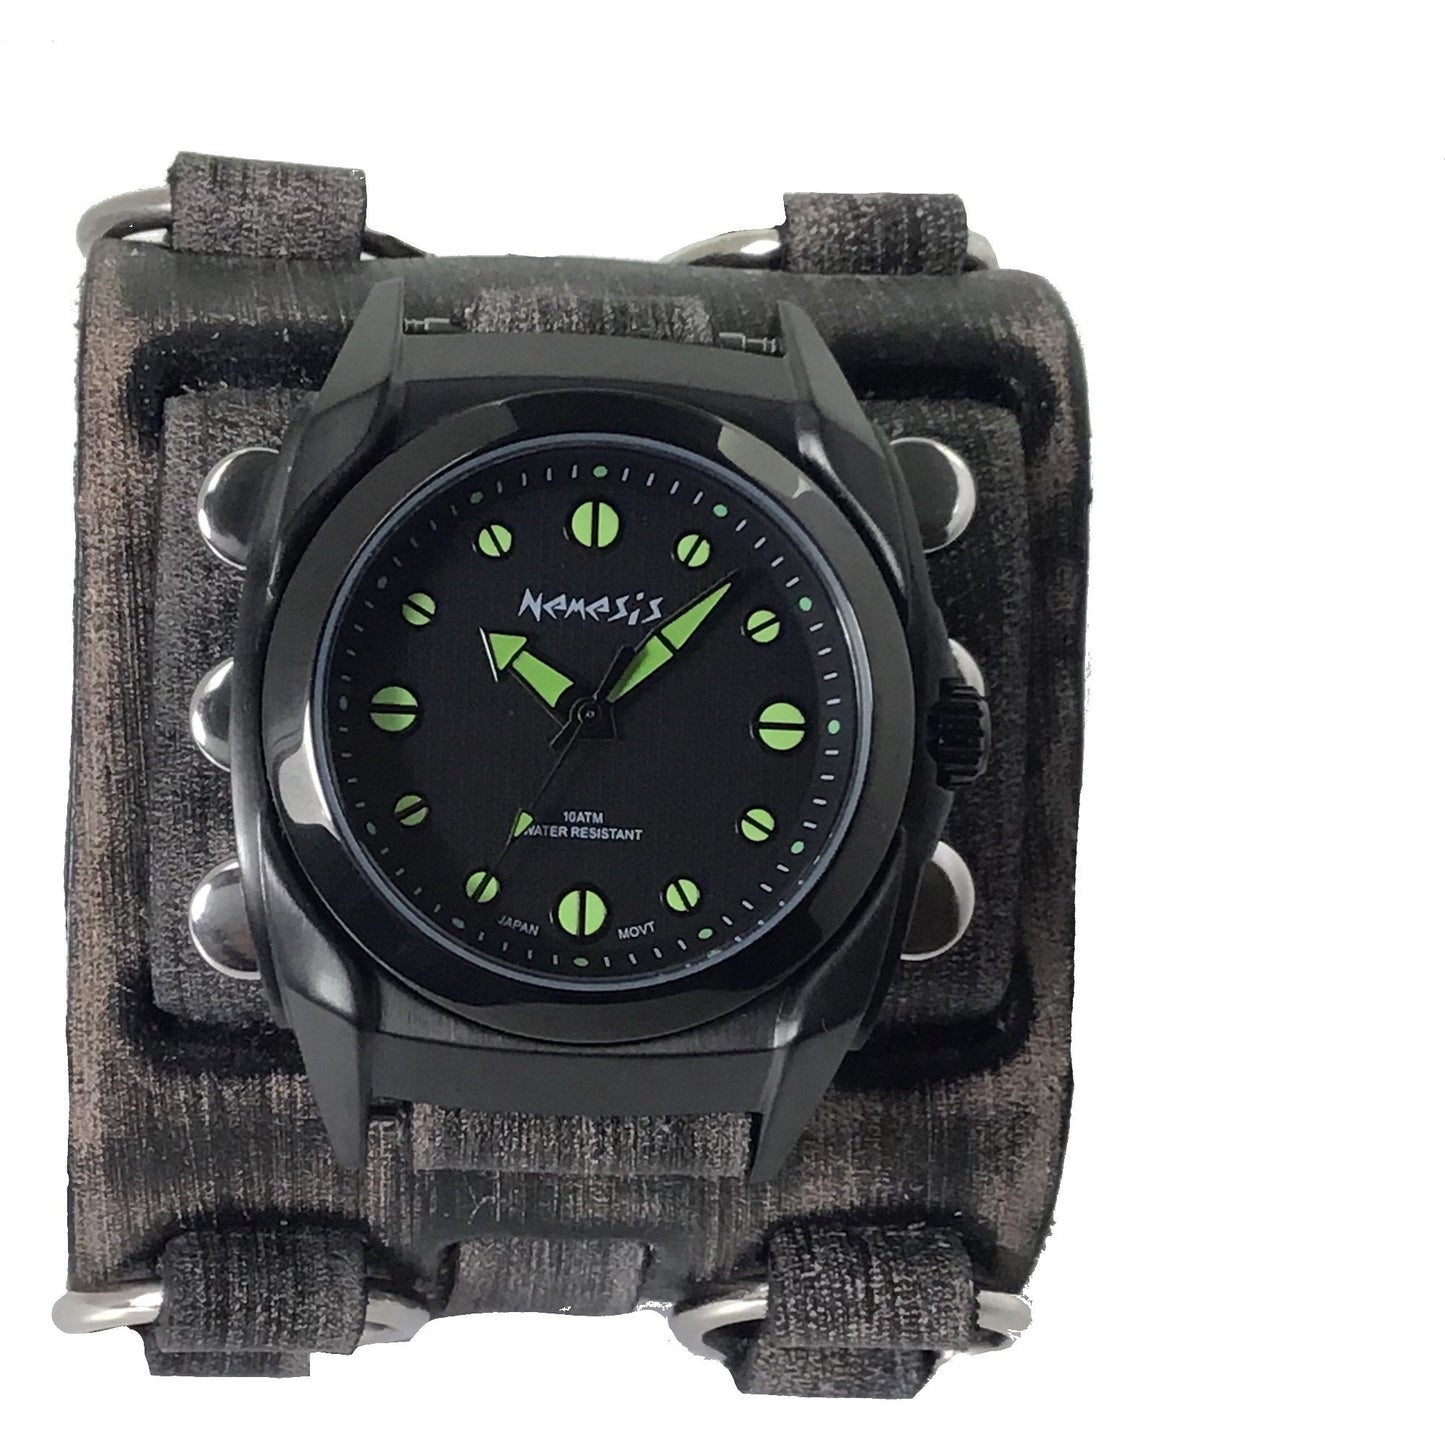 Eternity Black/Green Watch with Distressed Black Leather Triple Strap Cuff